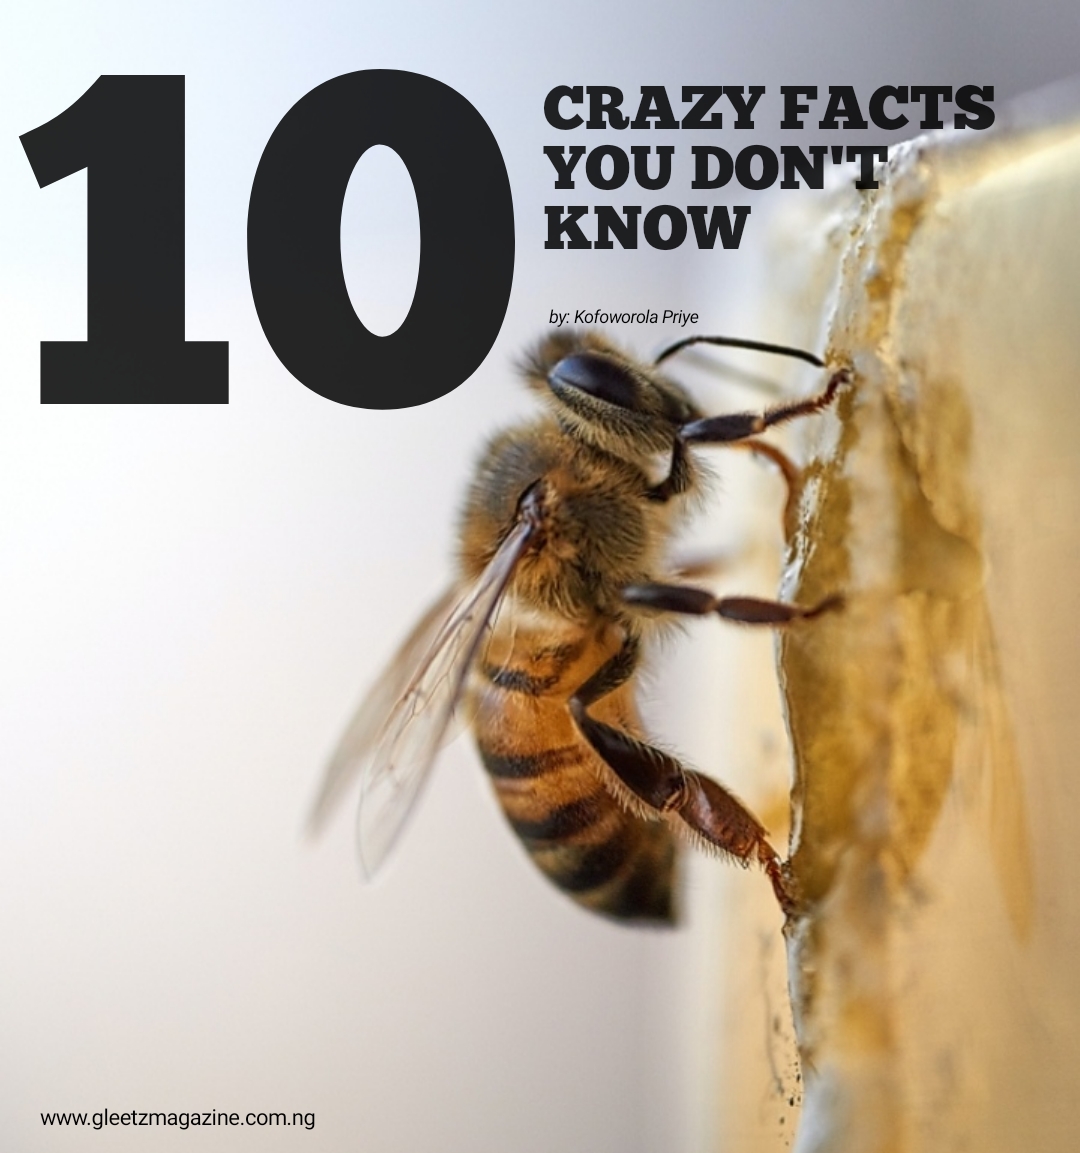 10 Crazy facts you probably don’t know